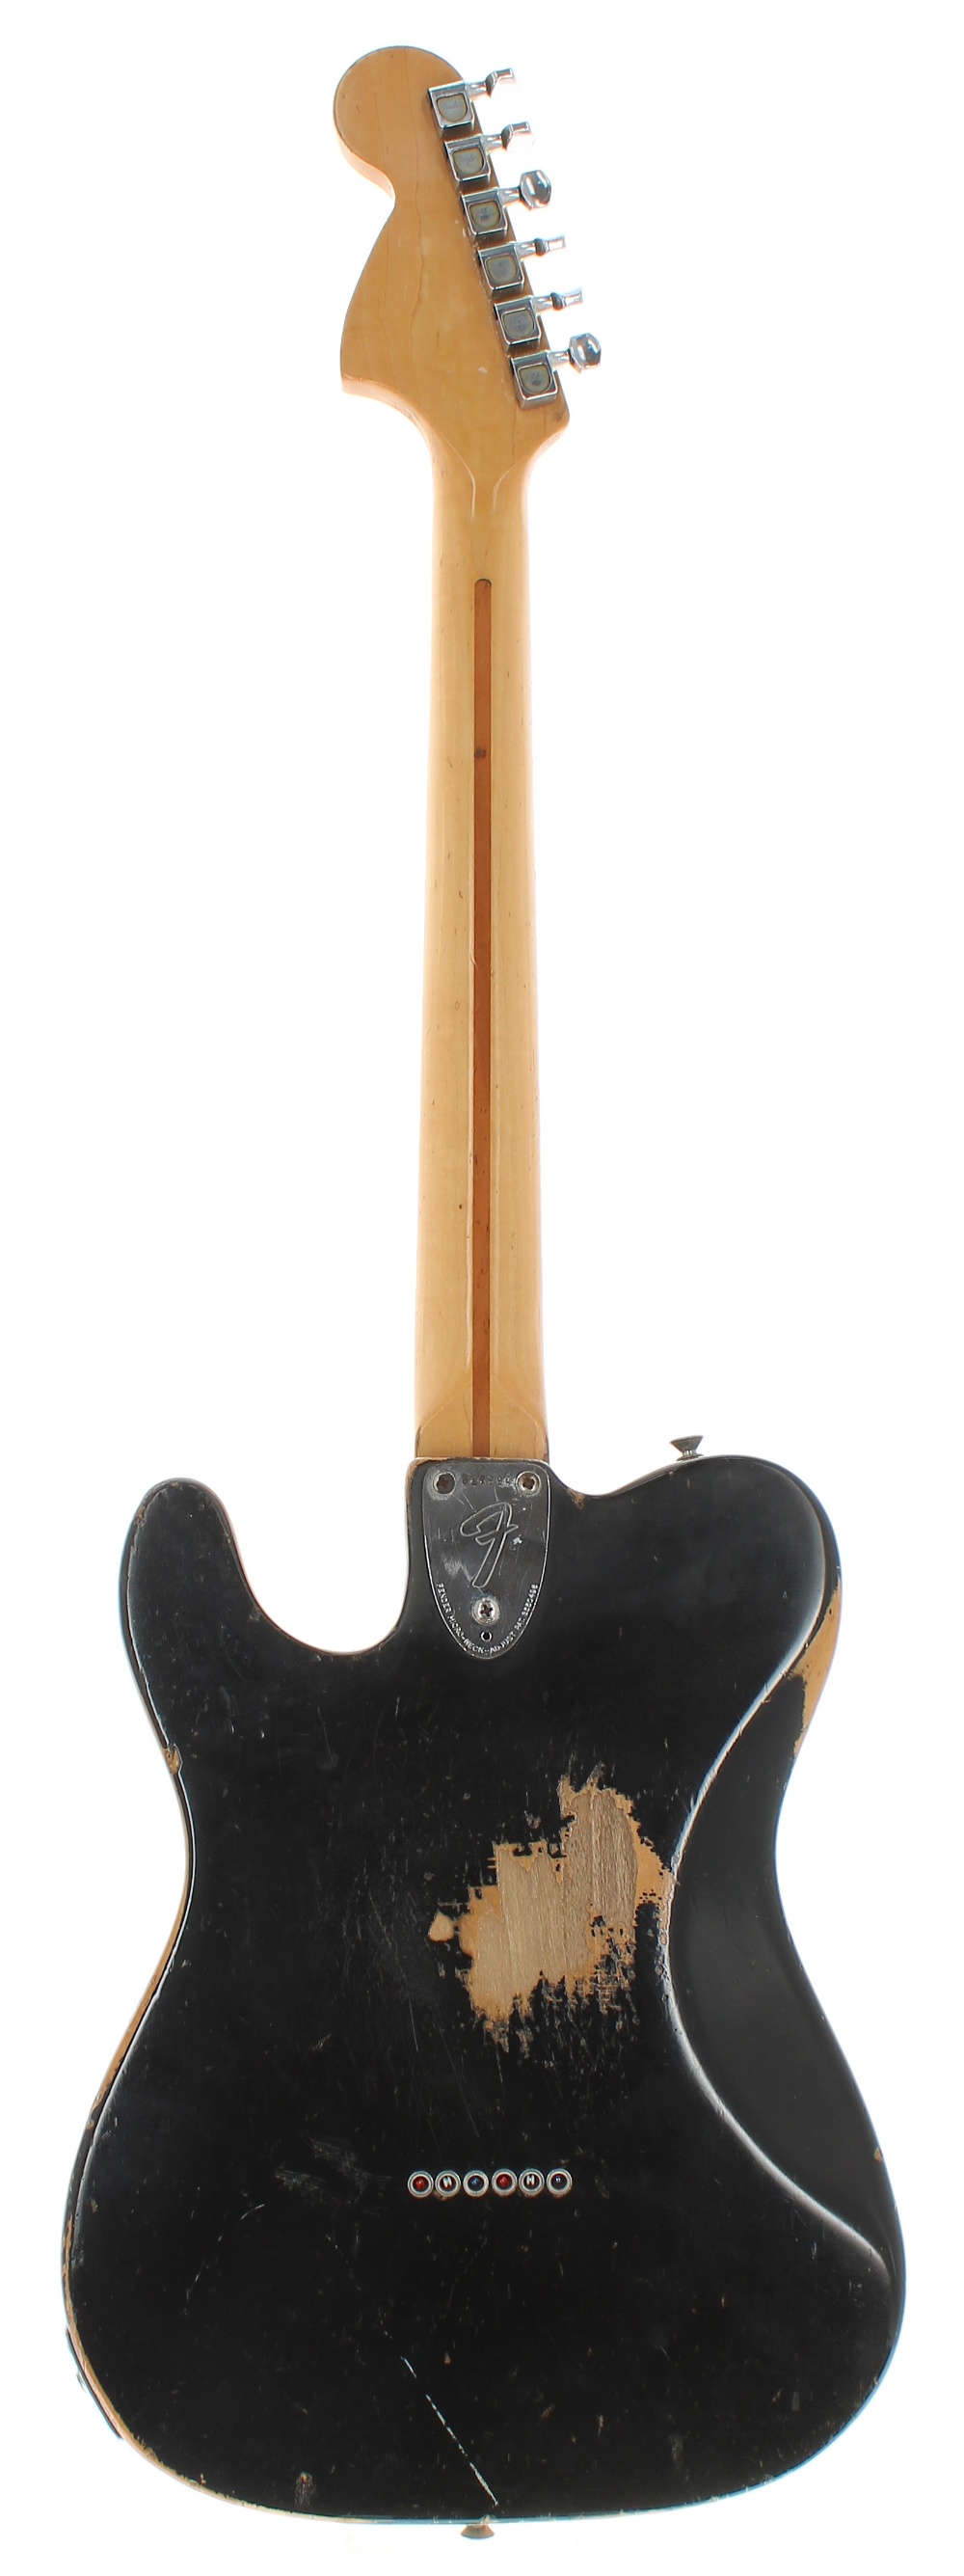 Fender Telecaster Deluxe electric guitar, made in USA, circa 1973, ser. no. 5xxxx4; Finish: black, - Image 2 of 2